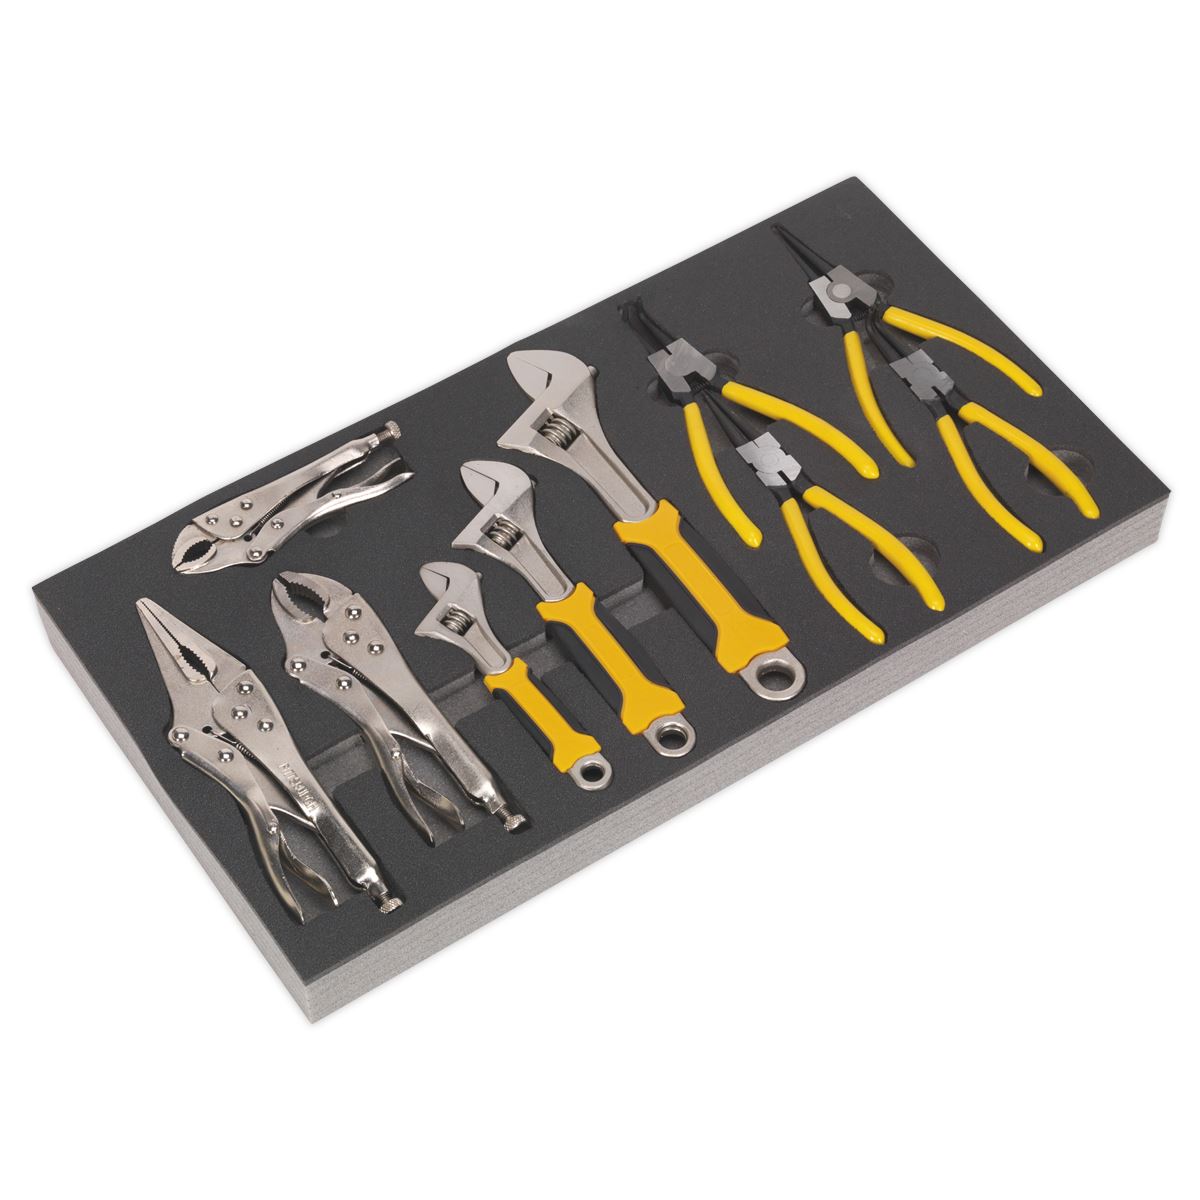 Siegen by Sealey Tool Tray with Adjustable Wrench & Pliers Set 10pc